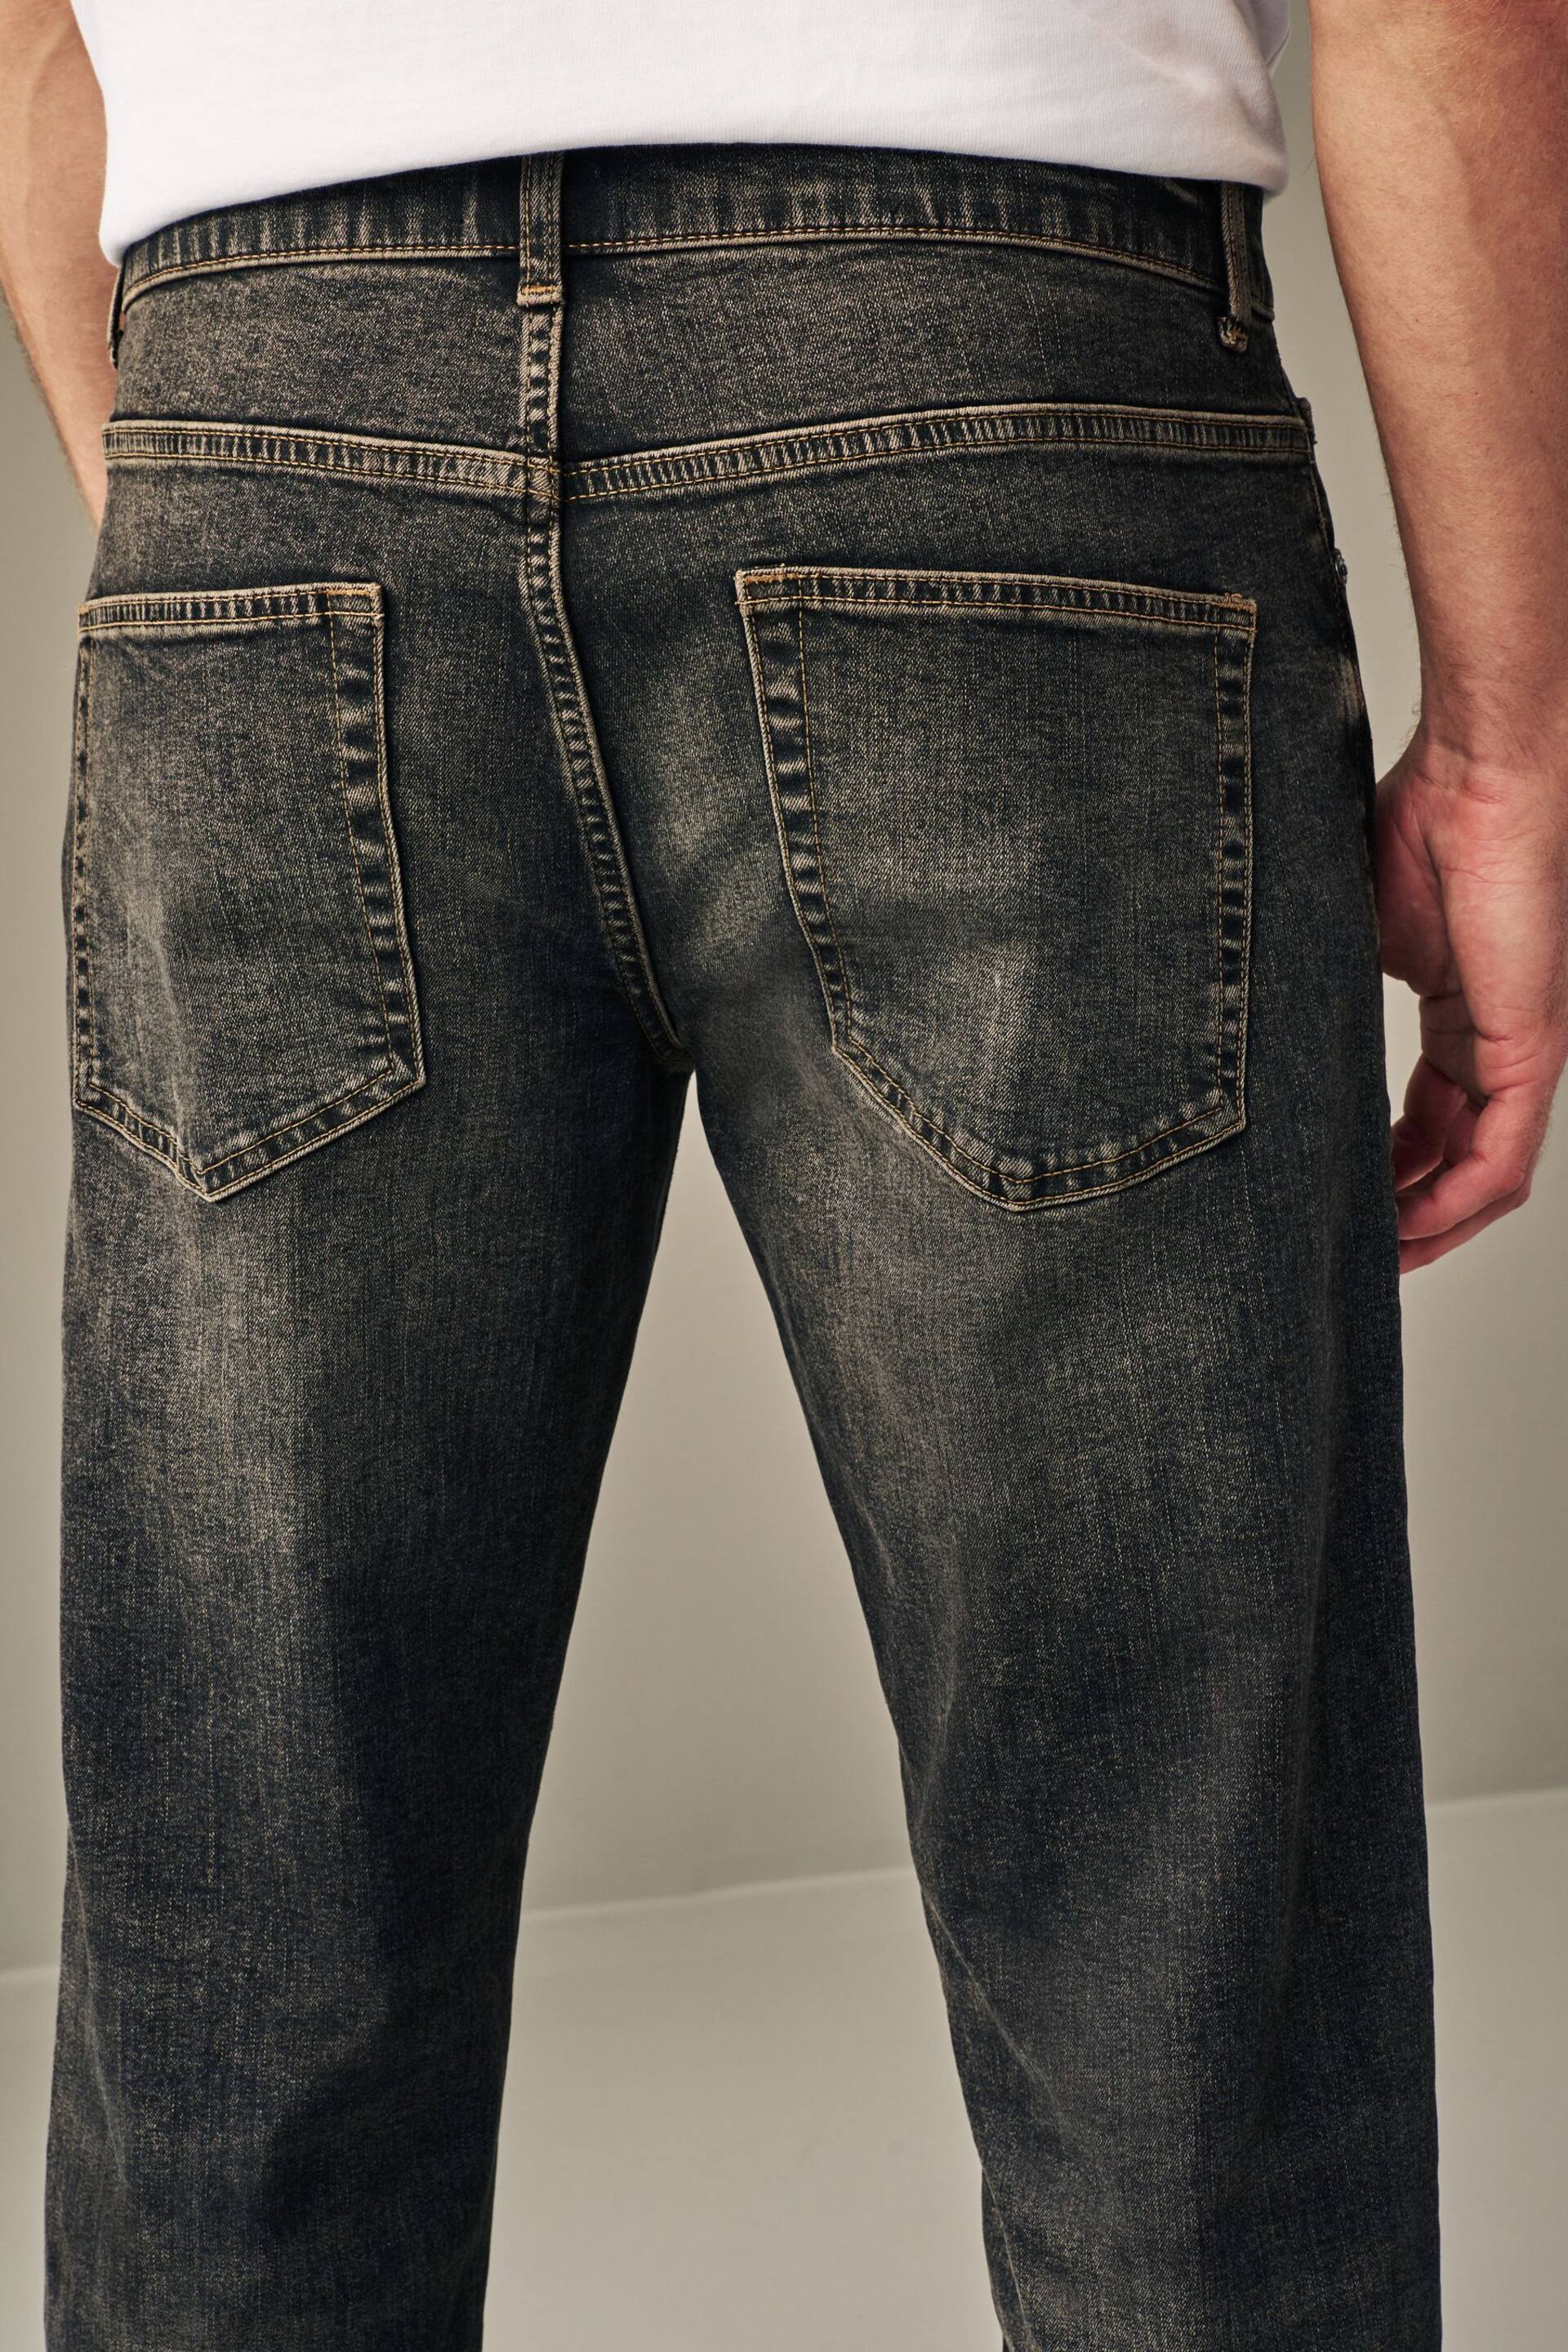 Brown Tint Relaxed Fit Vintage Stretch Authentic Jeans - Image 5 of 10